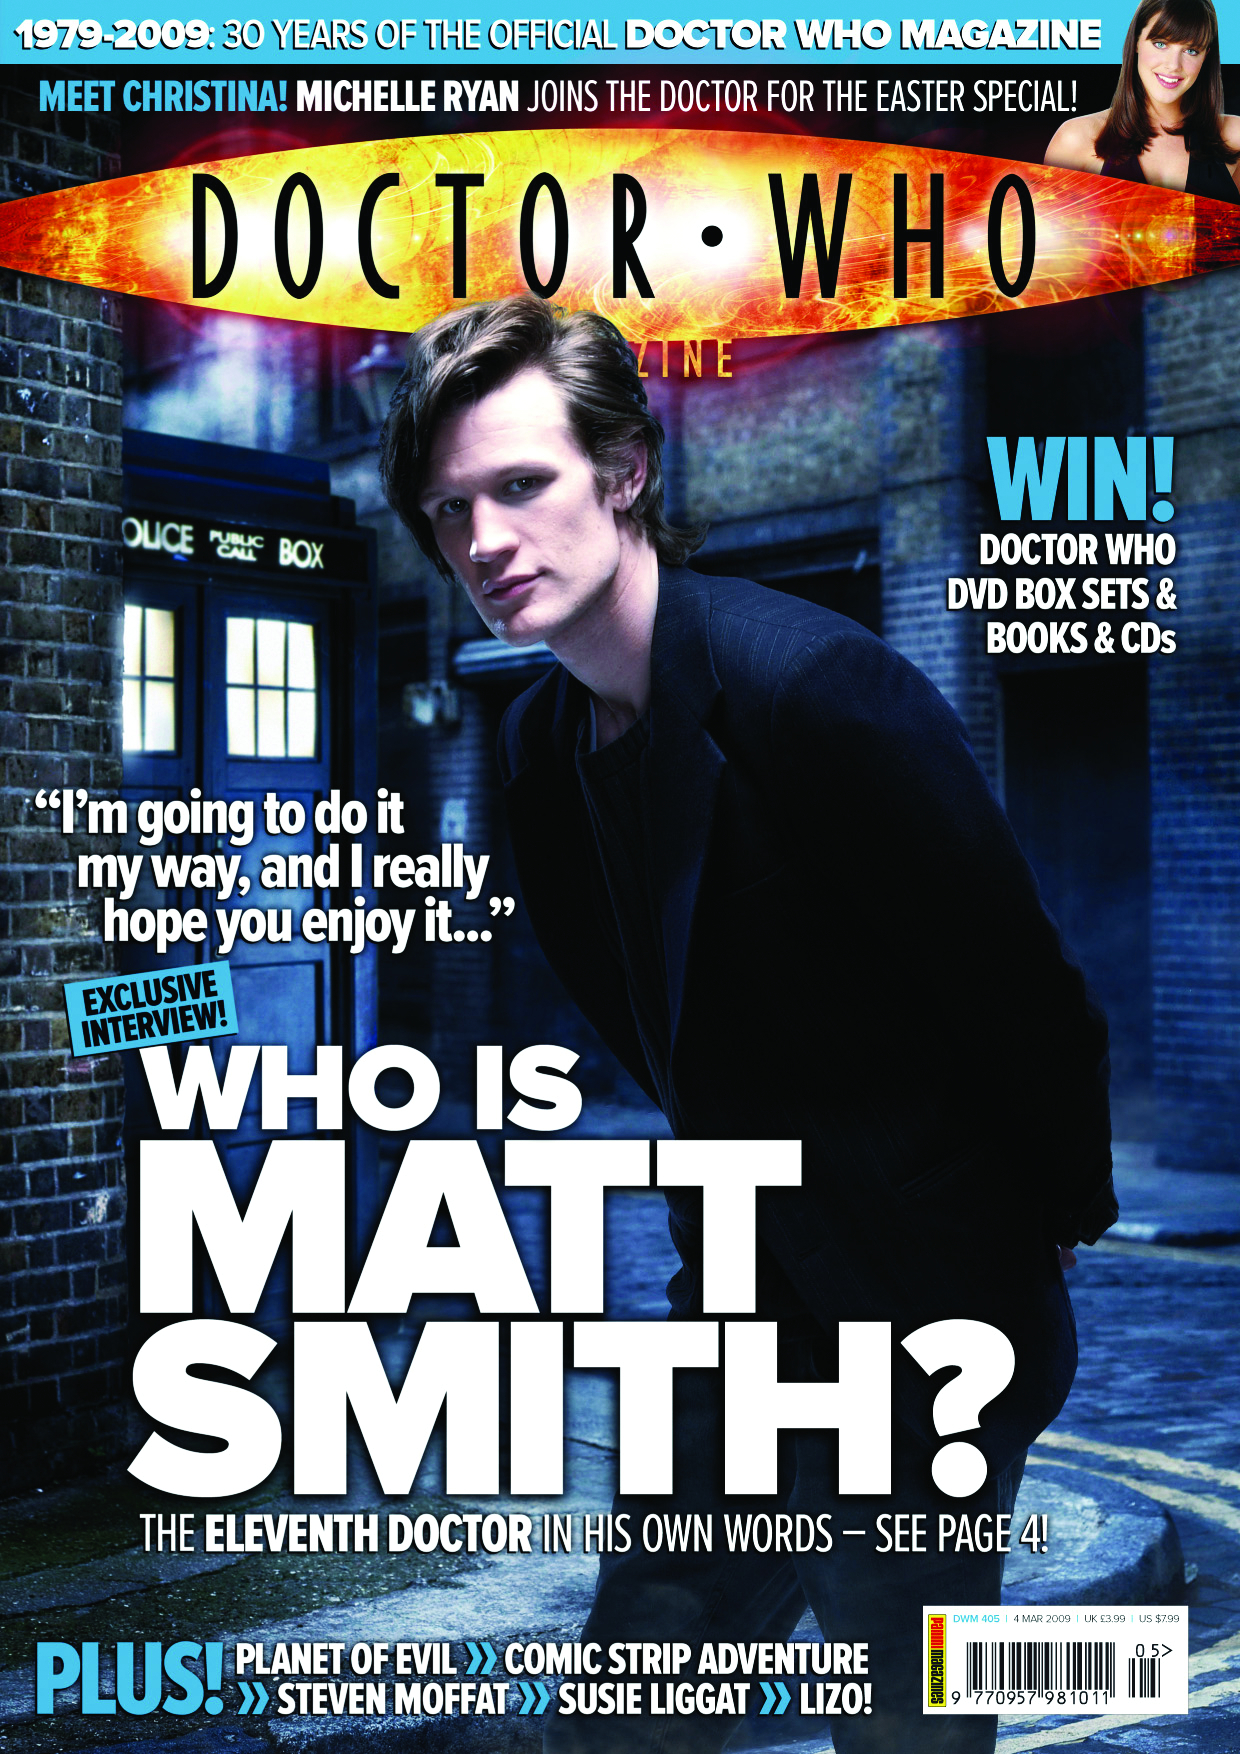 DOCTOR WHO MAGAZINE #417 (NOTE PRICE)